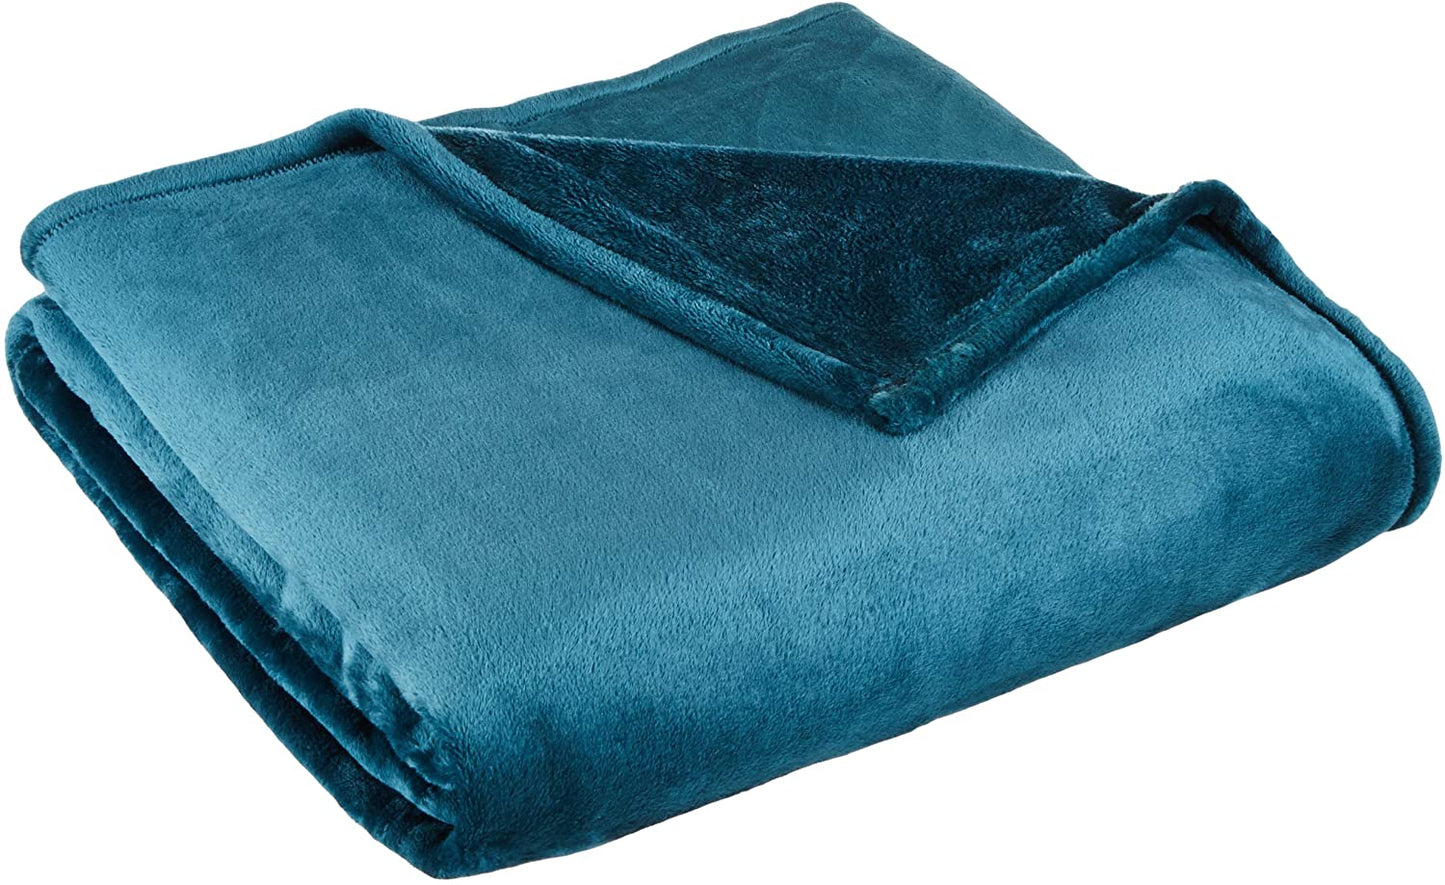 Thesis Cashmere Plush Blanket Full/Queen - Teal